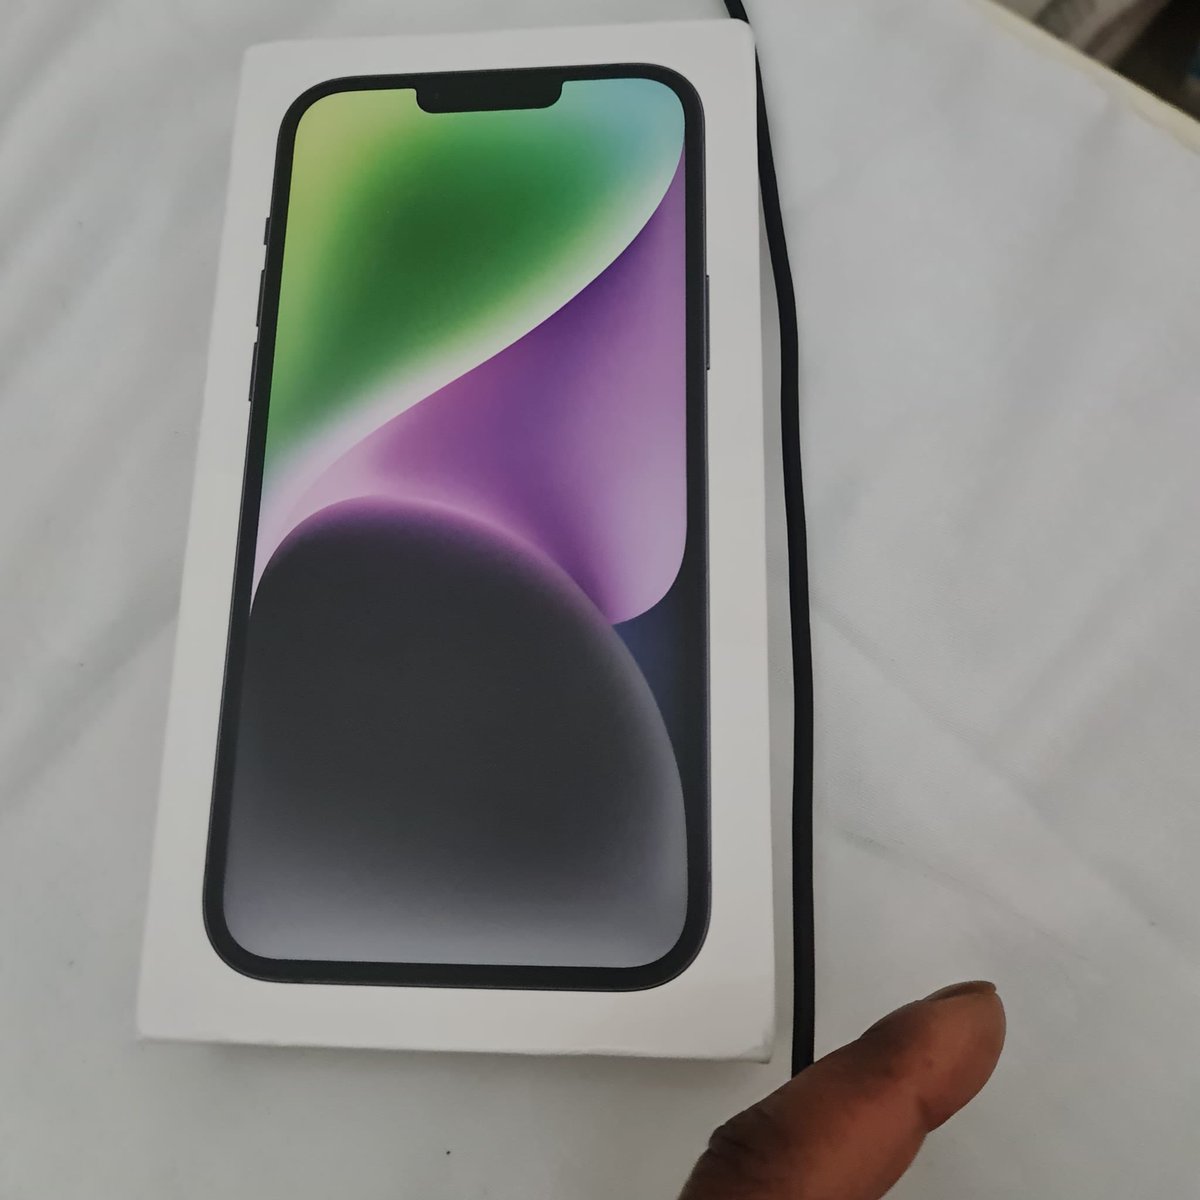 Brand new iPhone 14 Plus (Physical sim)

Price; N650,000

DM or chat Nifemi 07032261314 on WhatsApp to order now. Offer valid for 48hours.

#LimitedOffer #14Plus